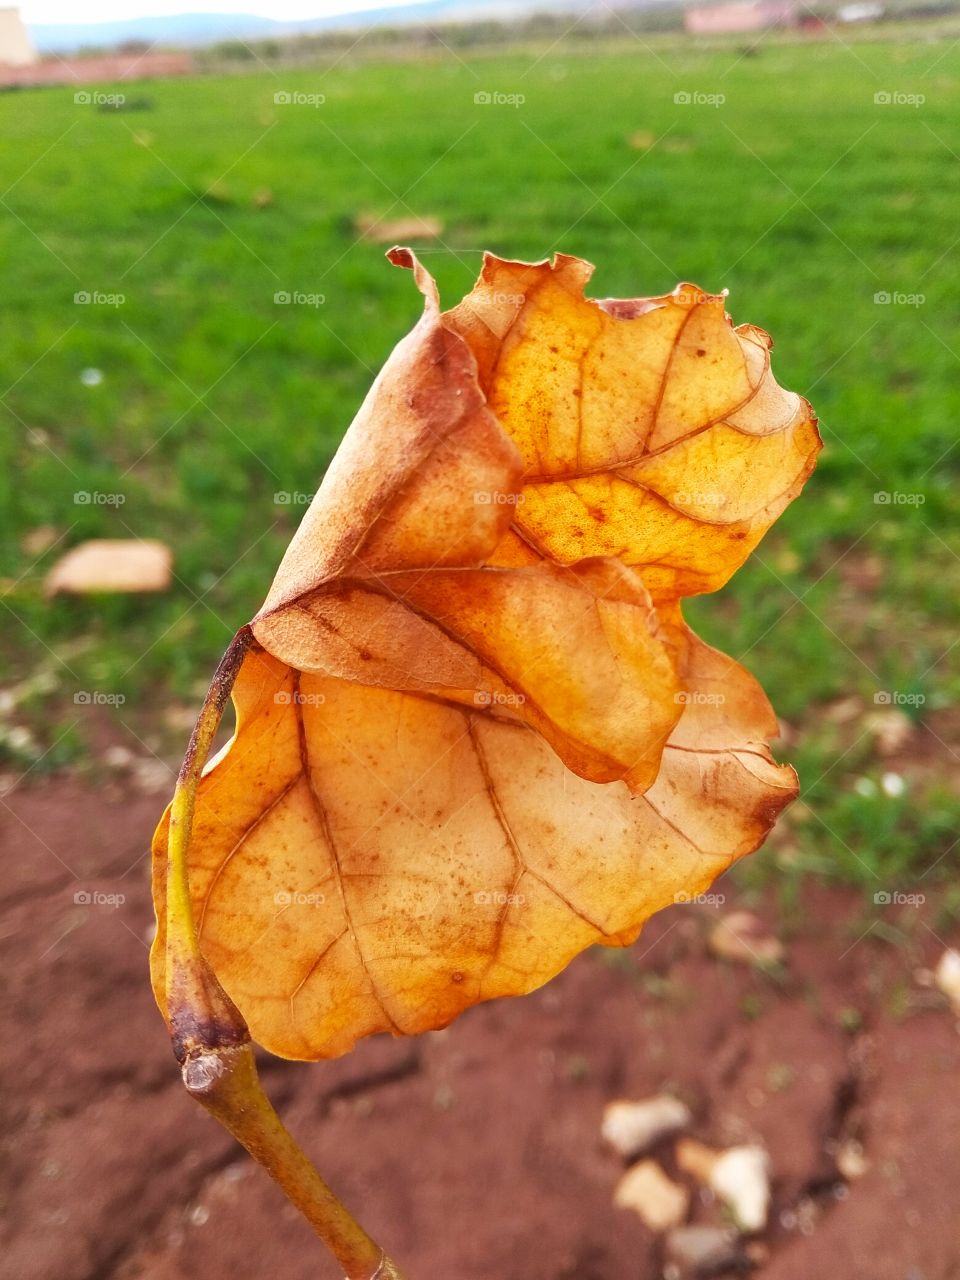 Fall, No Person, Nature, Leaf, Outdoors